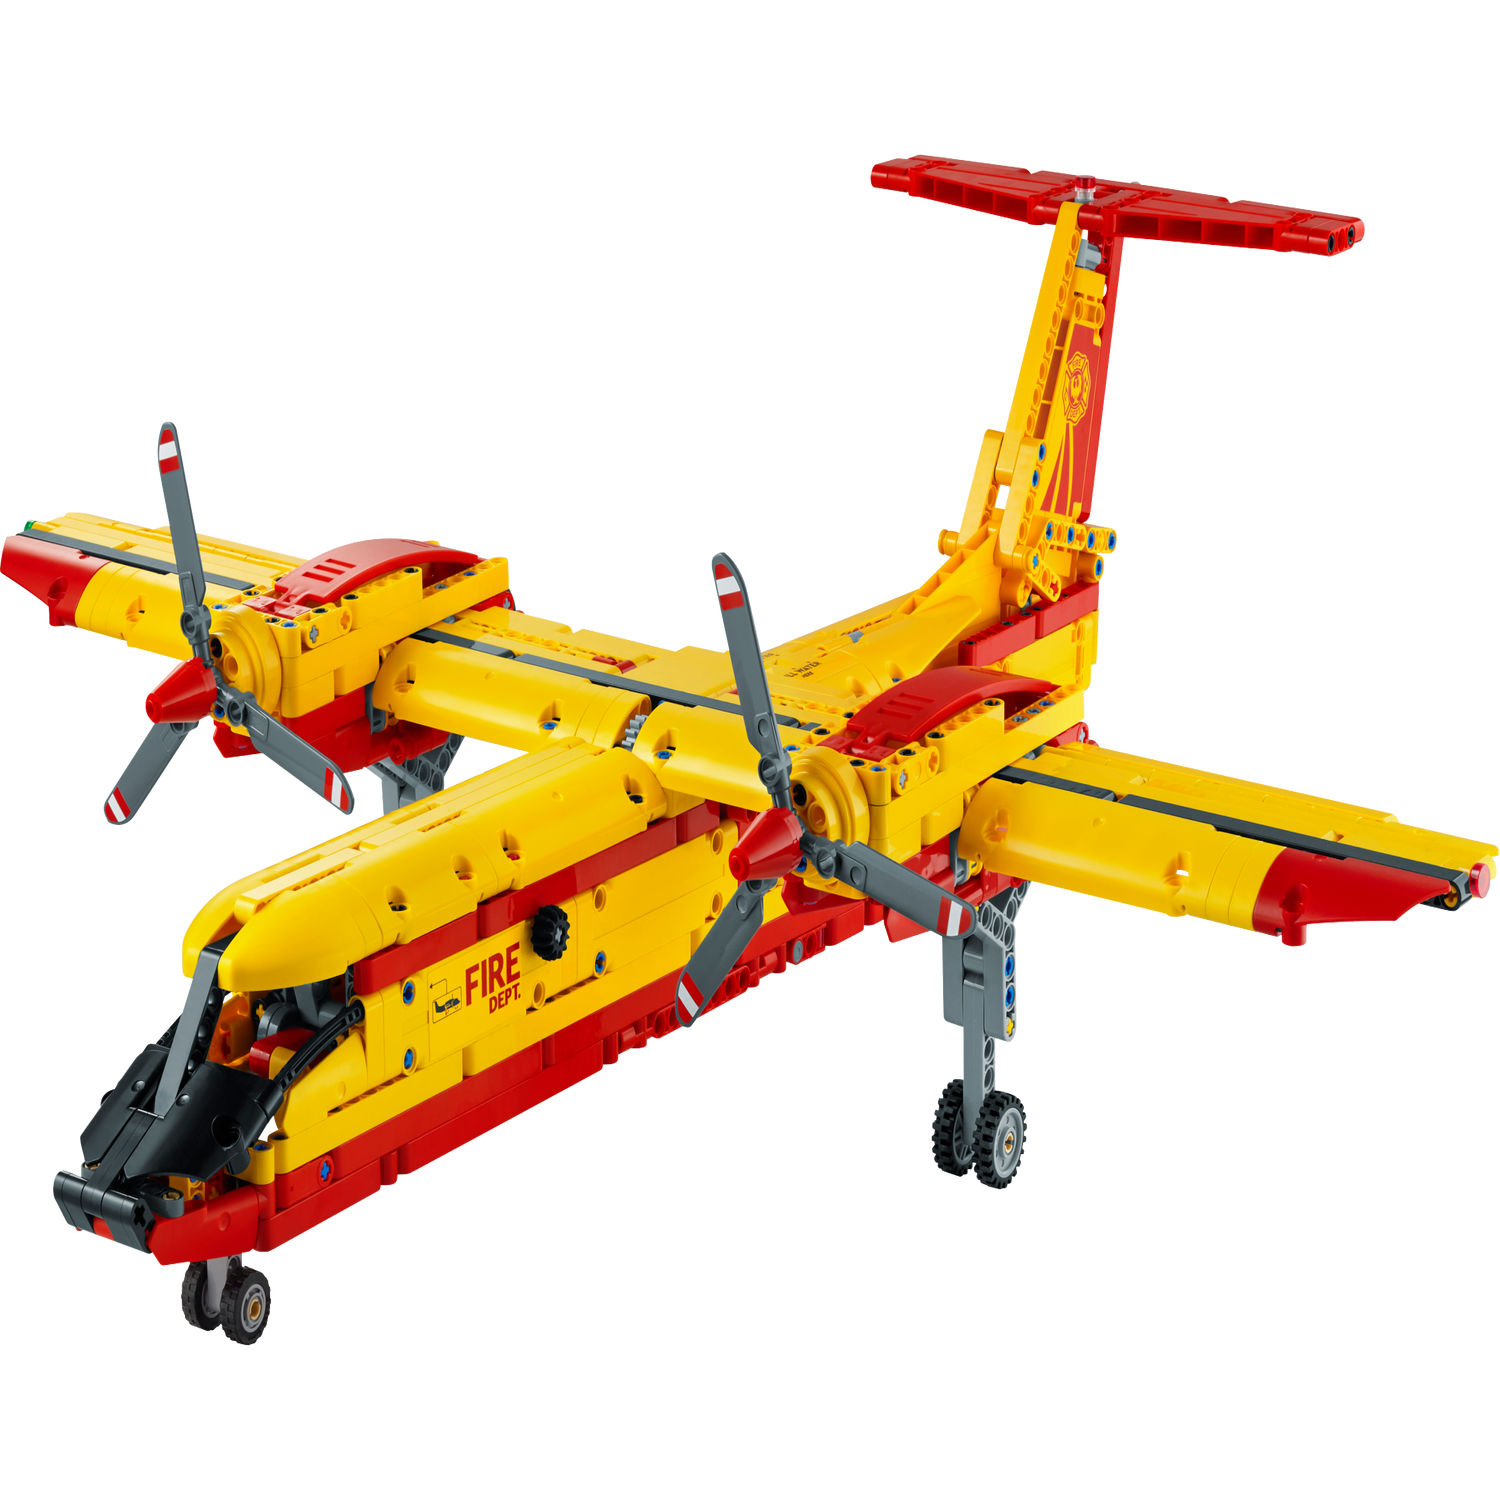 Firefighter Aircraft 42152 Technic™ | at the LEGO® Shop US